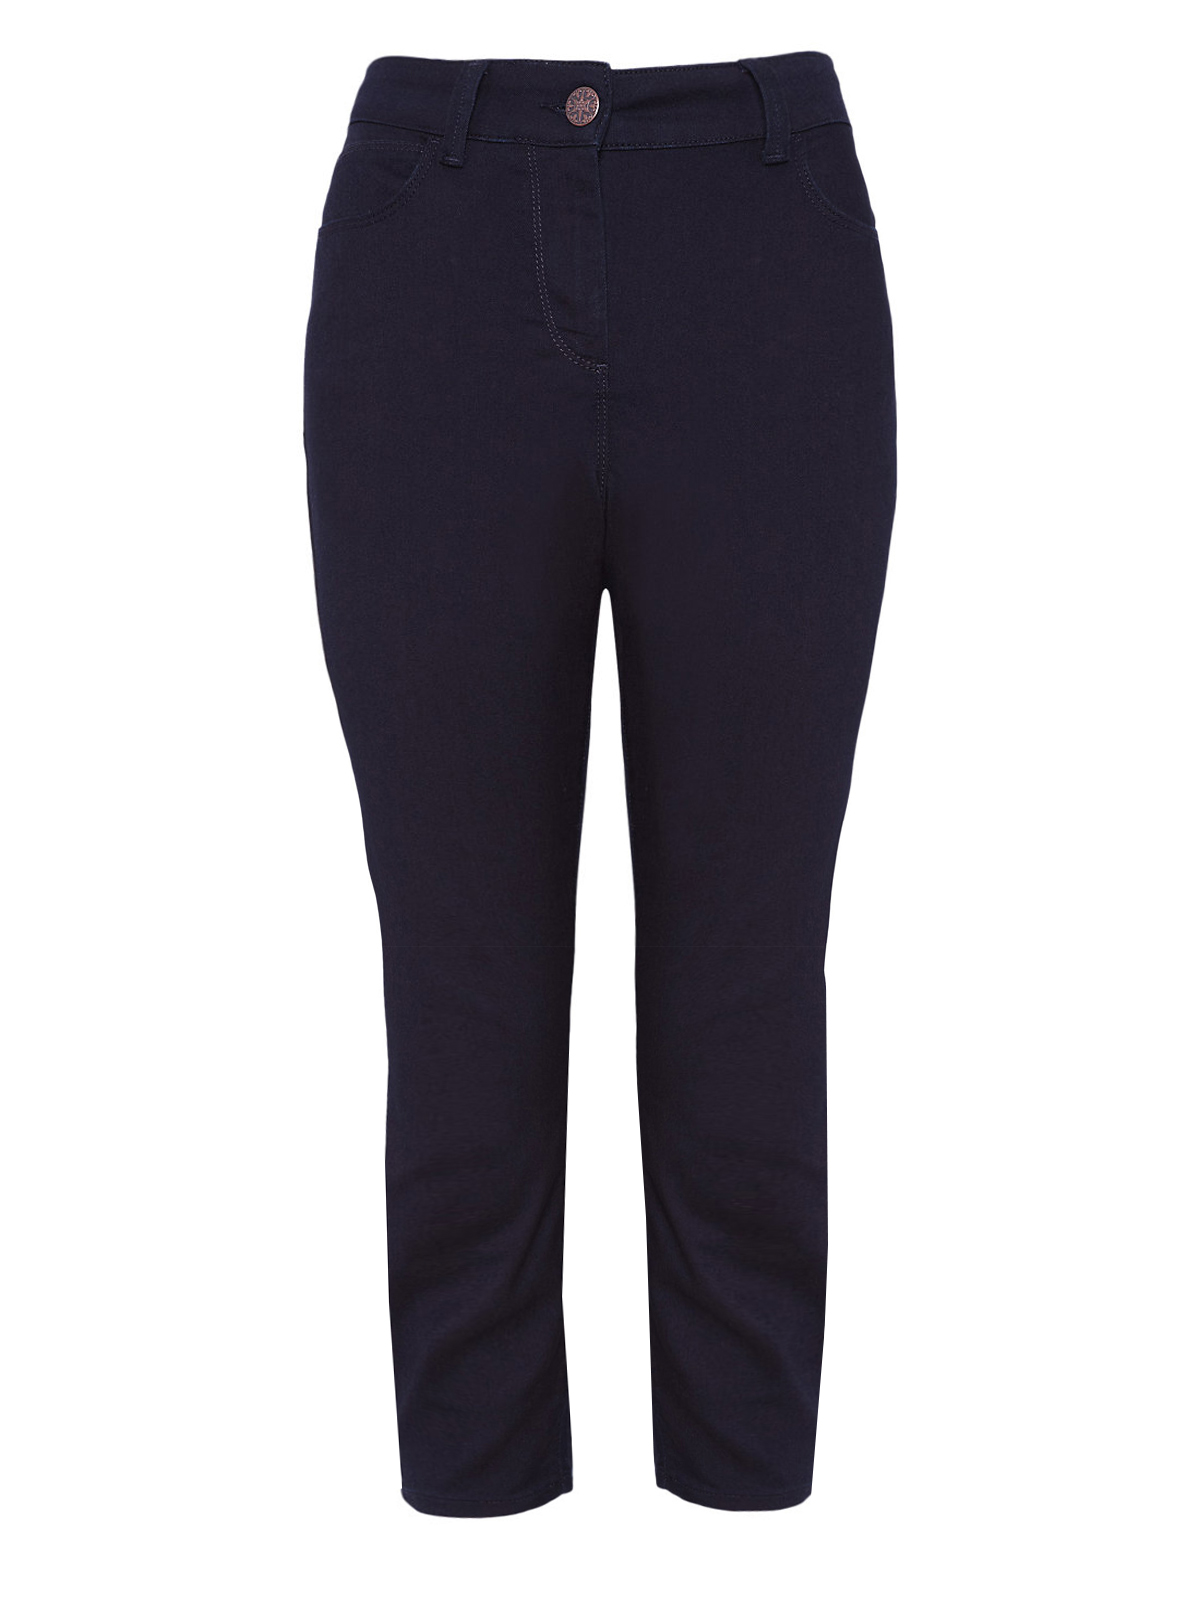 Marks and Spencer - - M&5 ASSORTED Ladies Trousers - Size 8 to 18